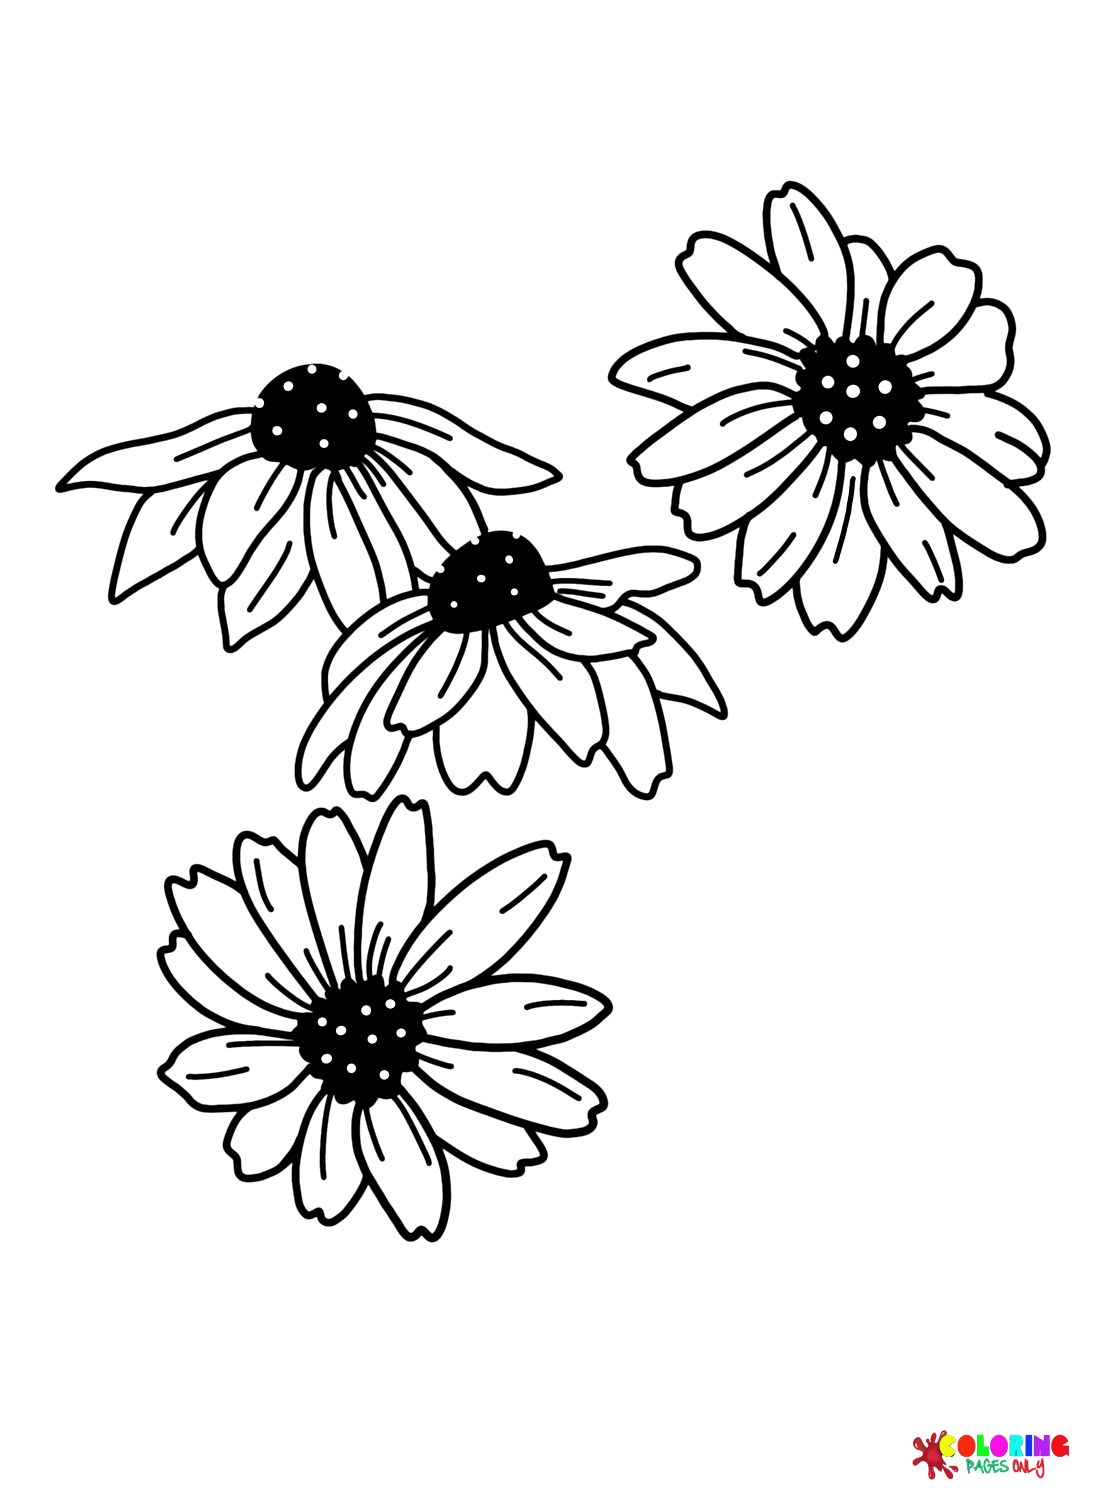 Daisy Images Coloring Page